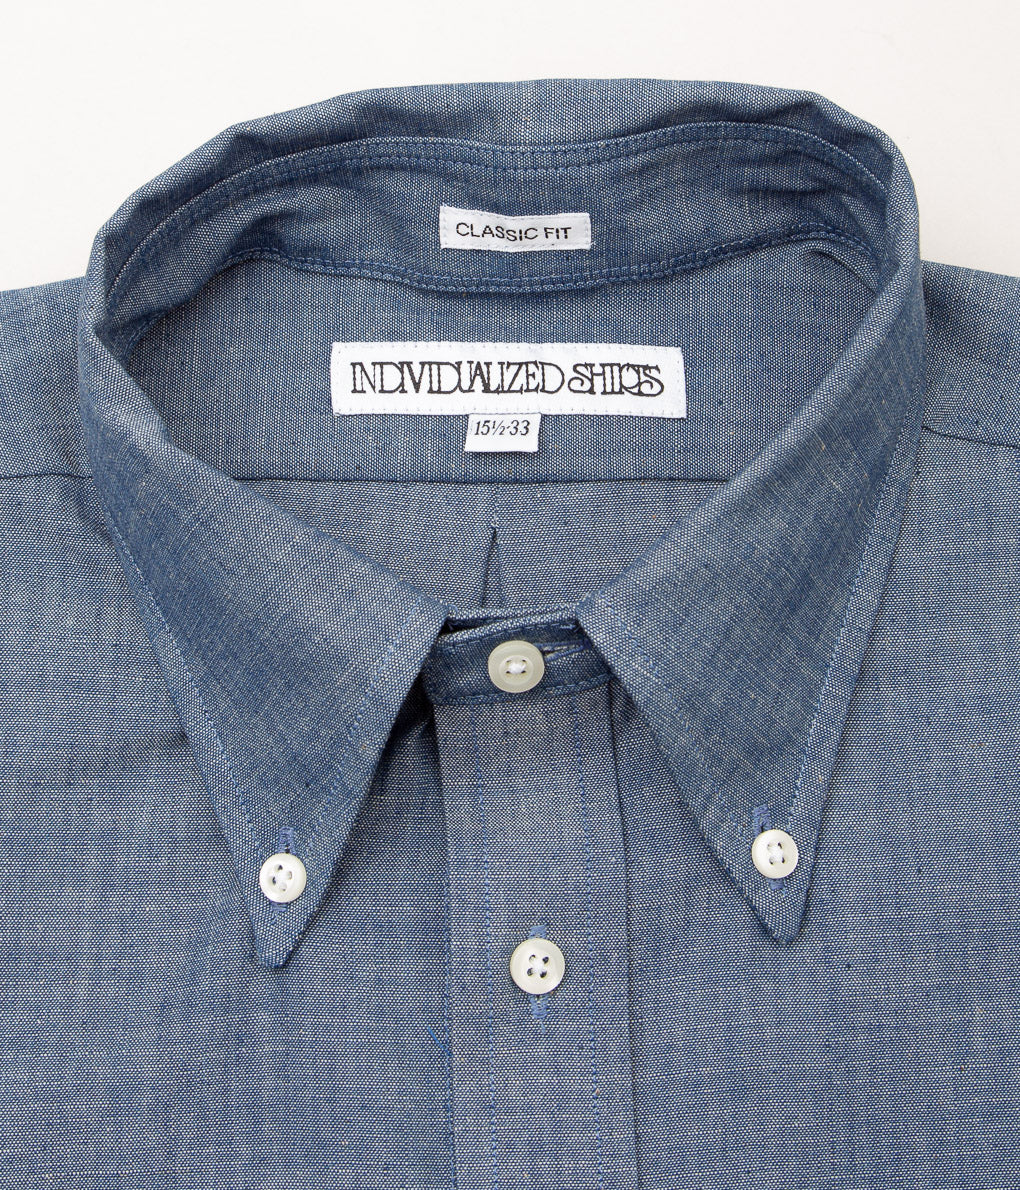 INDIVIDUALIZED SHIRTS "RIGID CHAMBRAY CLASSIC FIT BUTTON DOWN SHIRT"(BLUE)